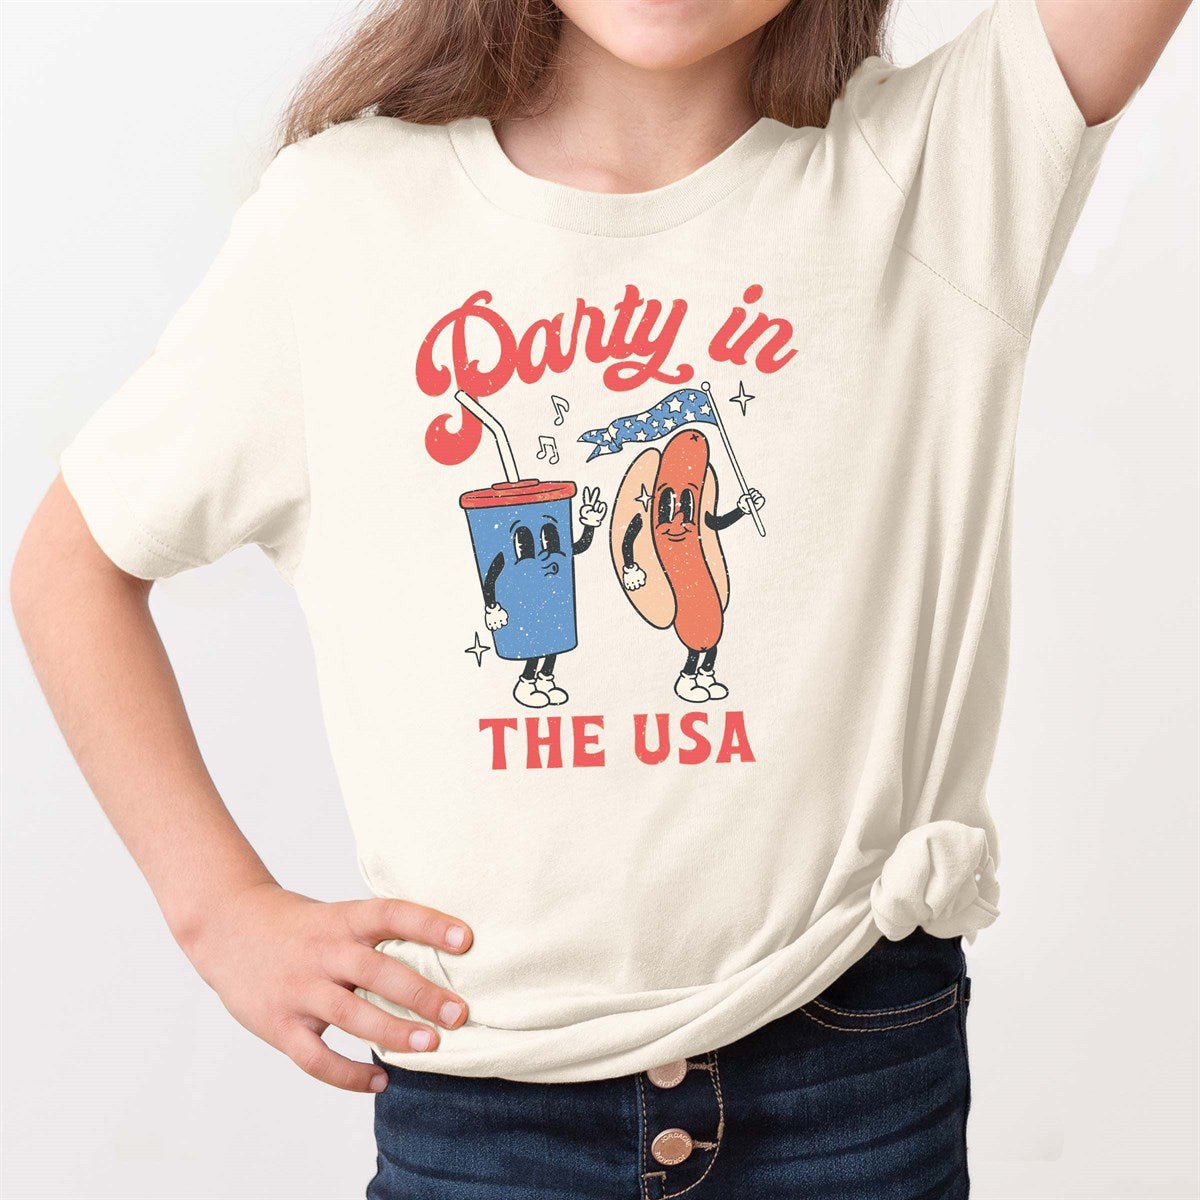 Party in the USA Hotdog Youth Wholesale Tee - Limeberry Designs